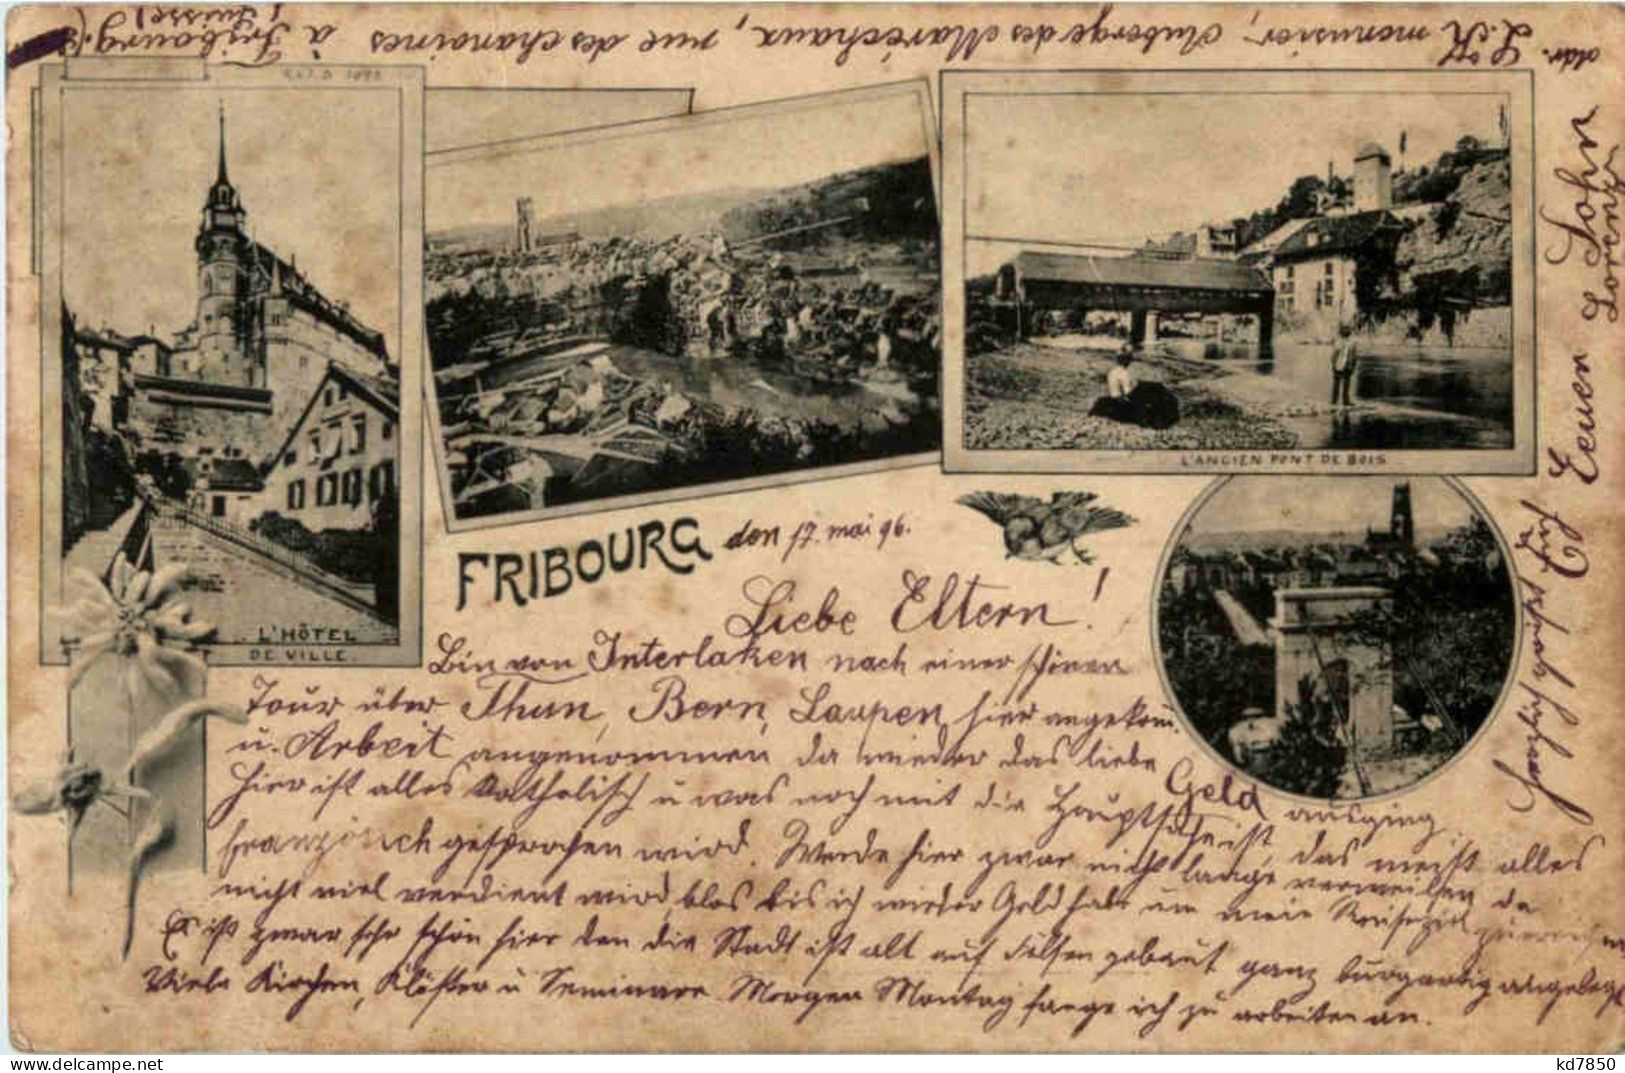 Fribourg - 1896 - Fribourg